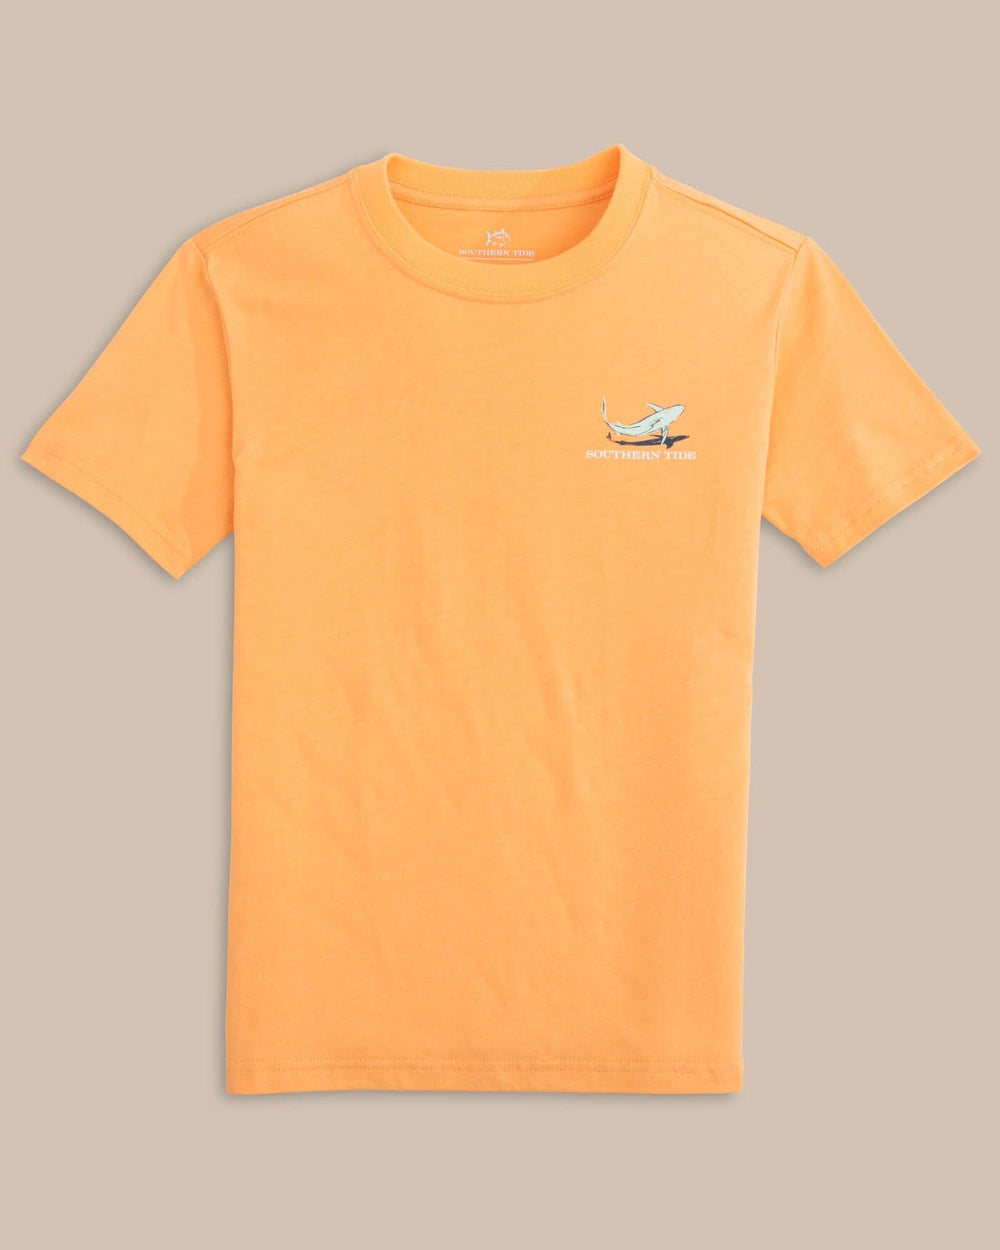 The front view of the Southern Tide Youth Yachts of Sharks Short Sleeve T-shirt by Southern Tide - Salmon Bluff Orange